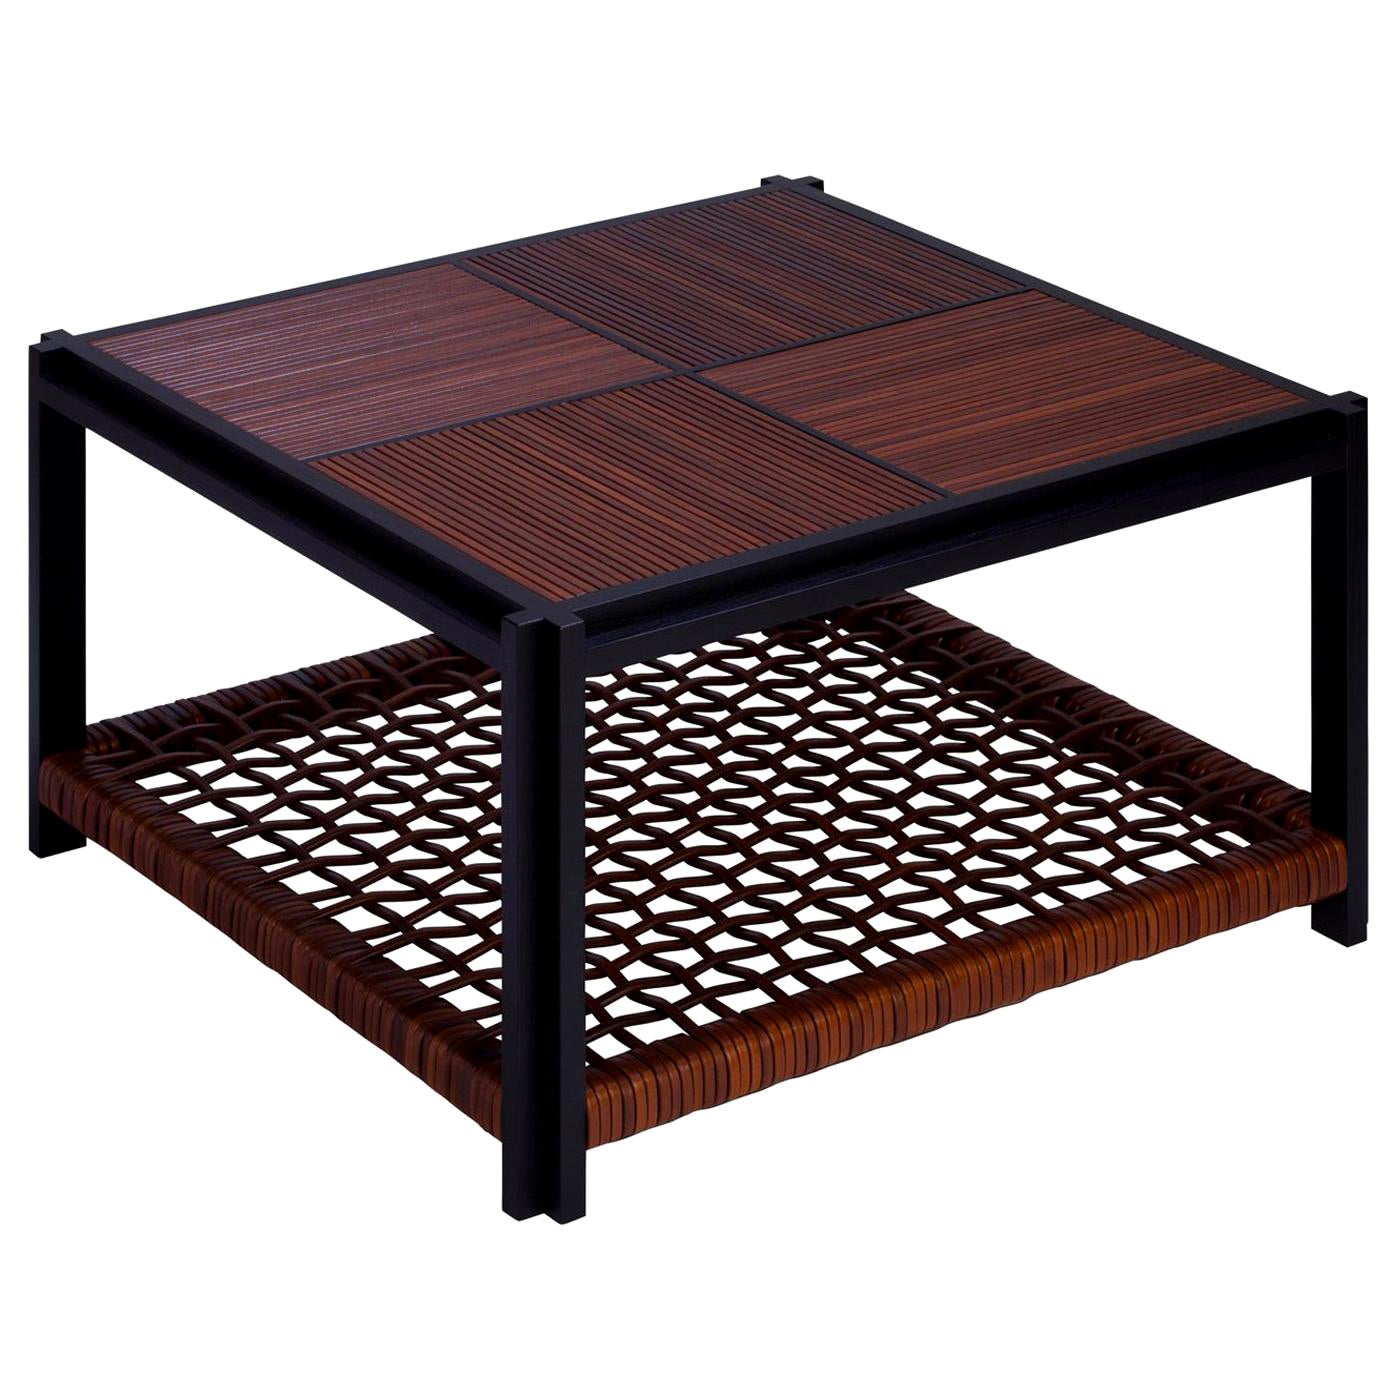 Structura Crisscross 2-Level Square Coffee Table For Sale